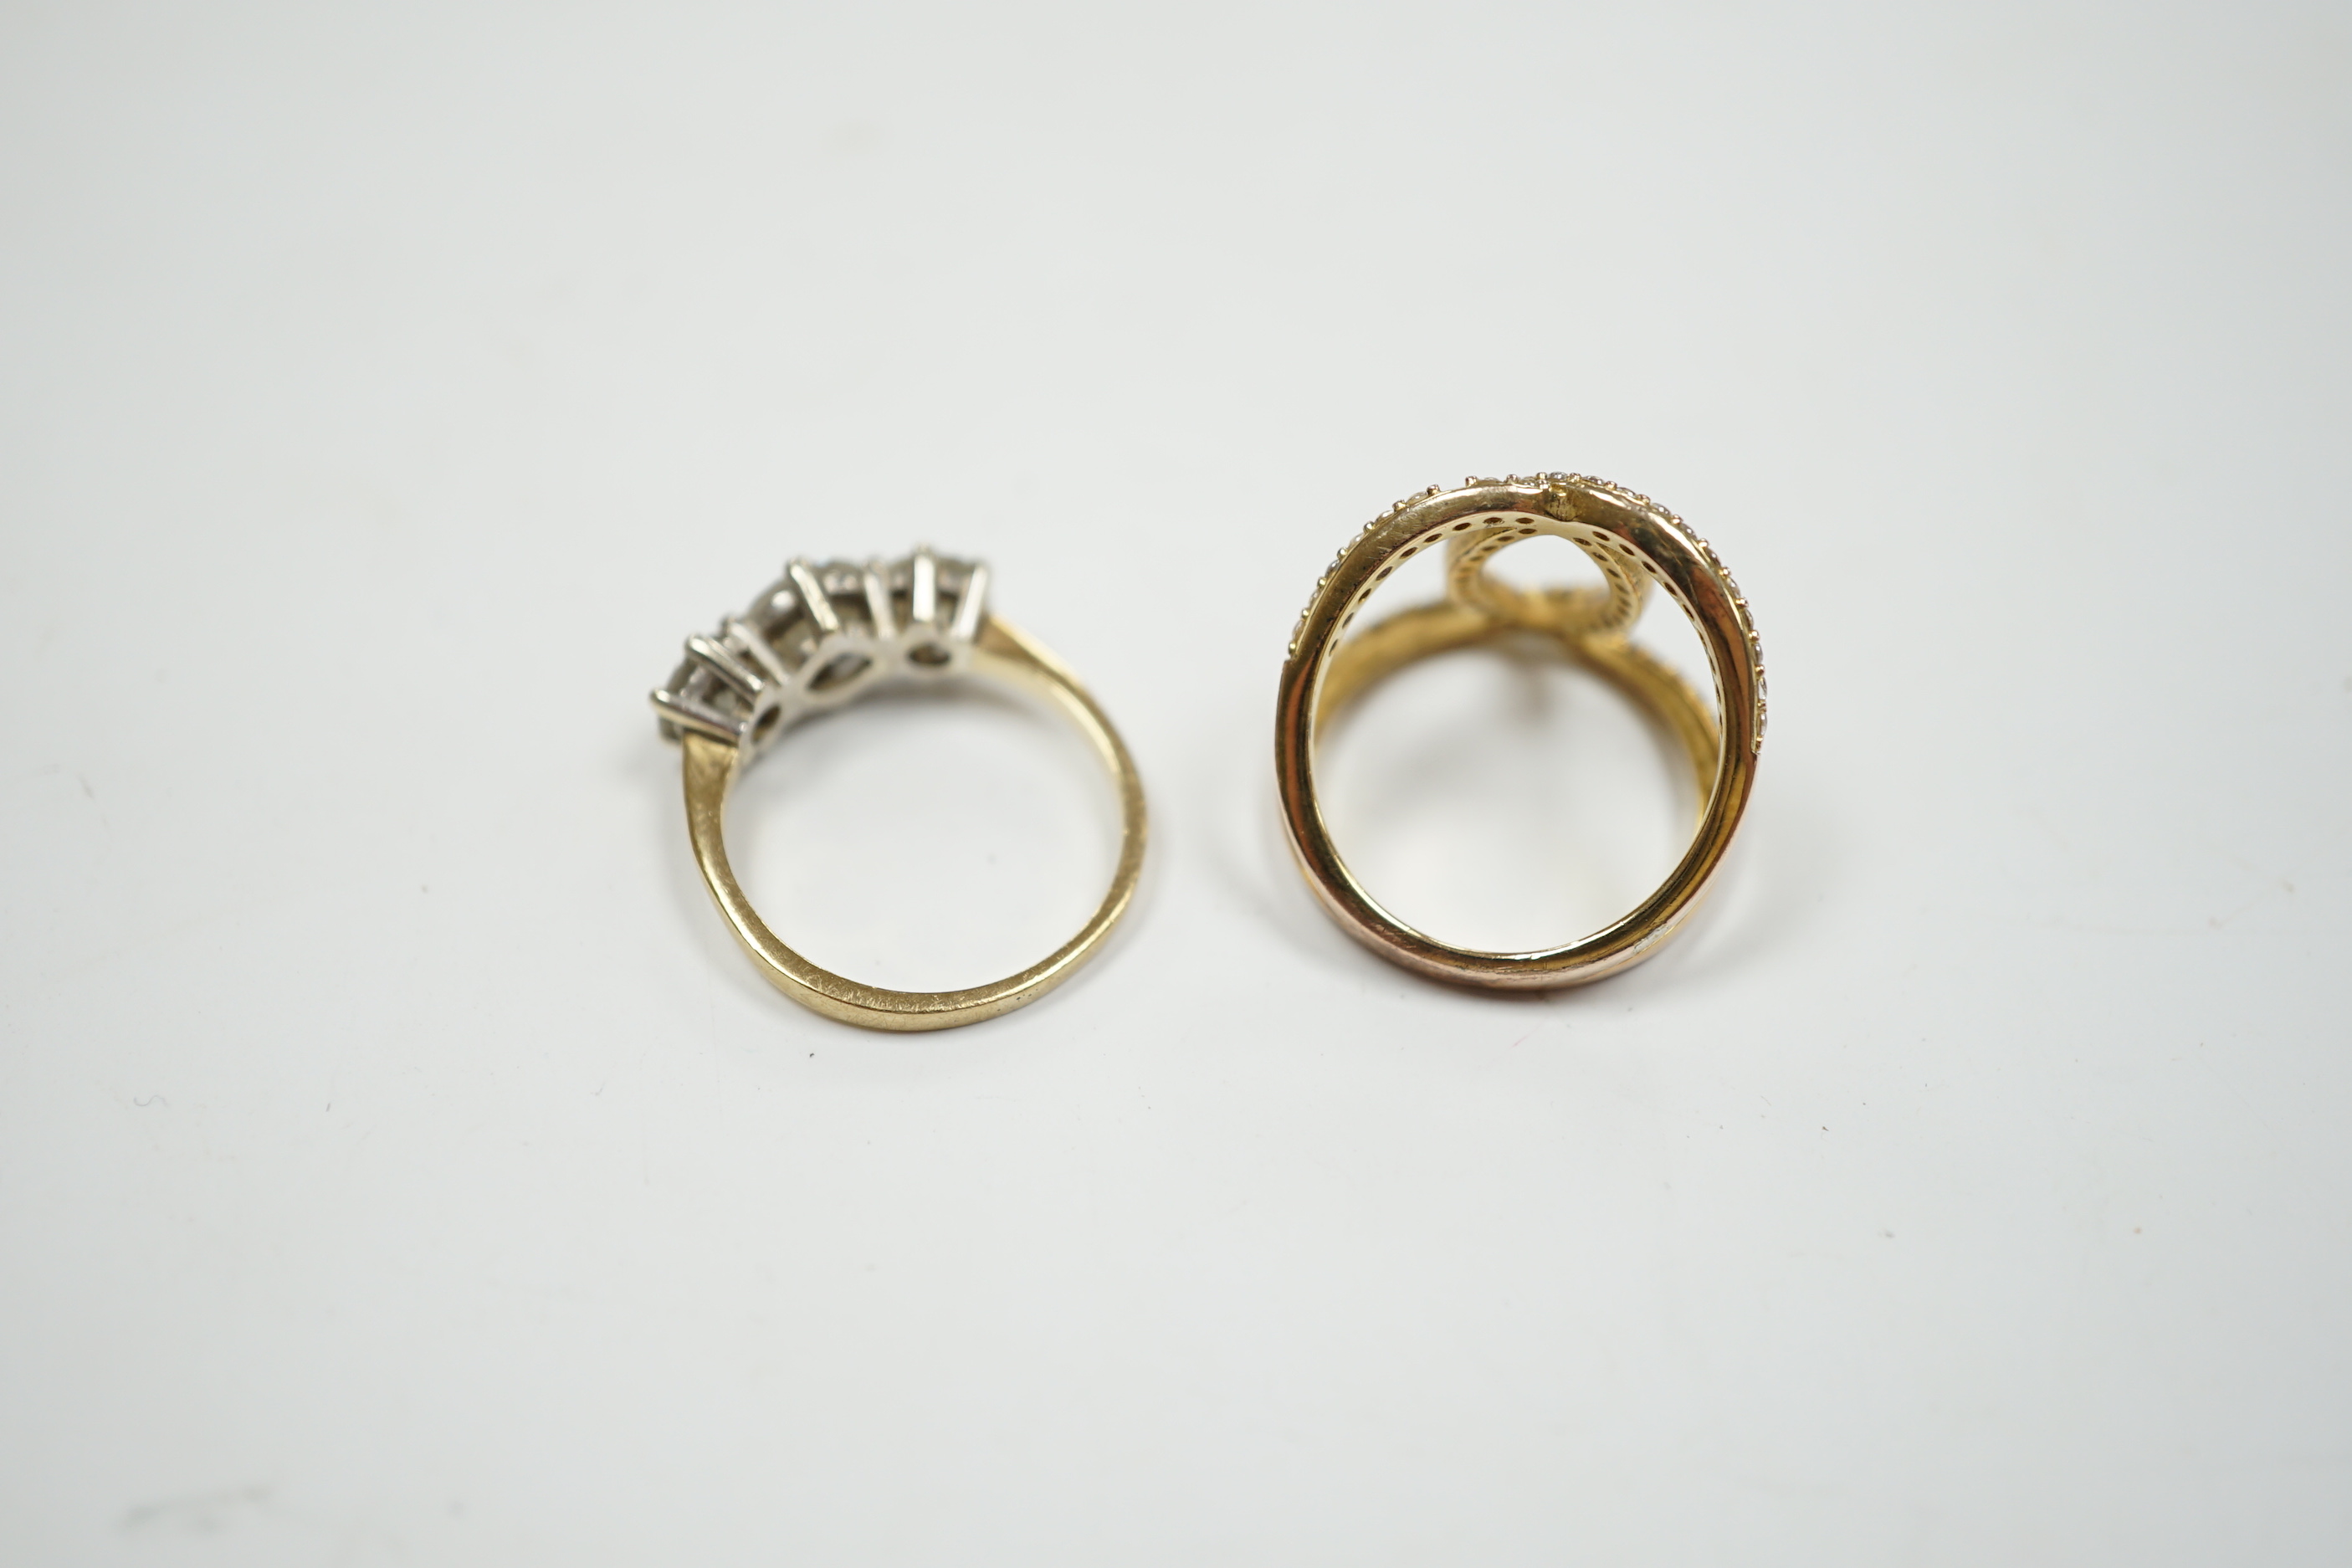 A 9ct gold and three stone simulated diamond ring and a gilt 925 ring. - Image 7 of 7